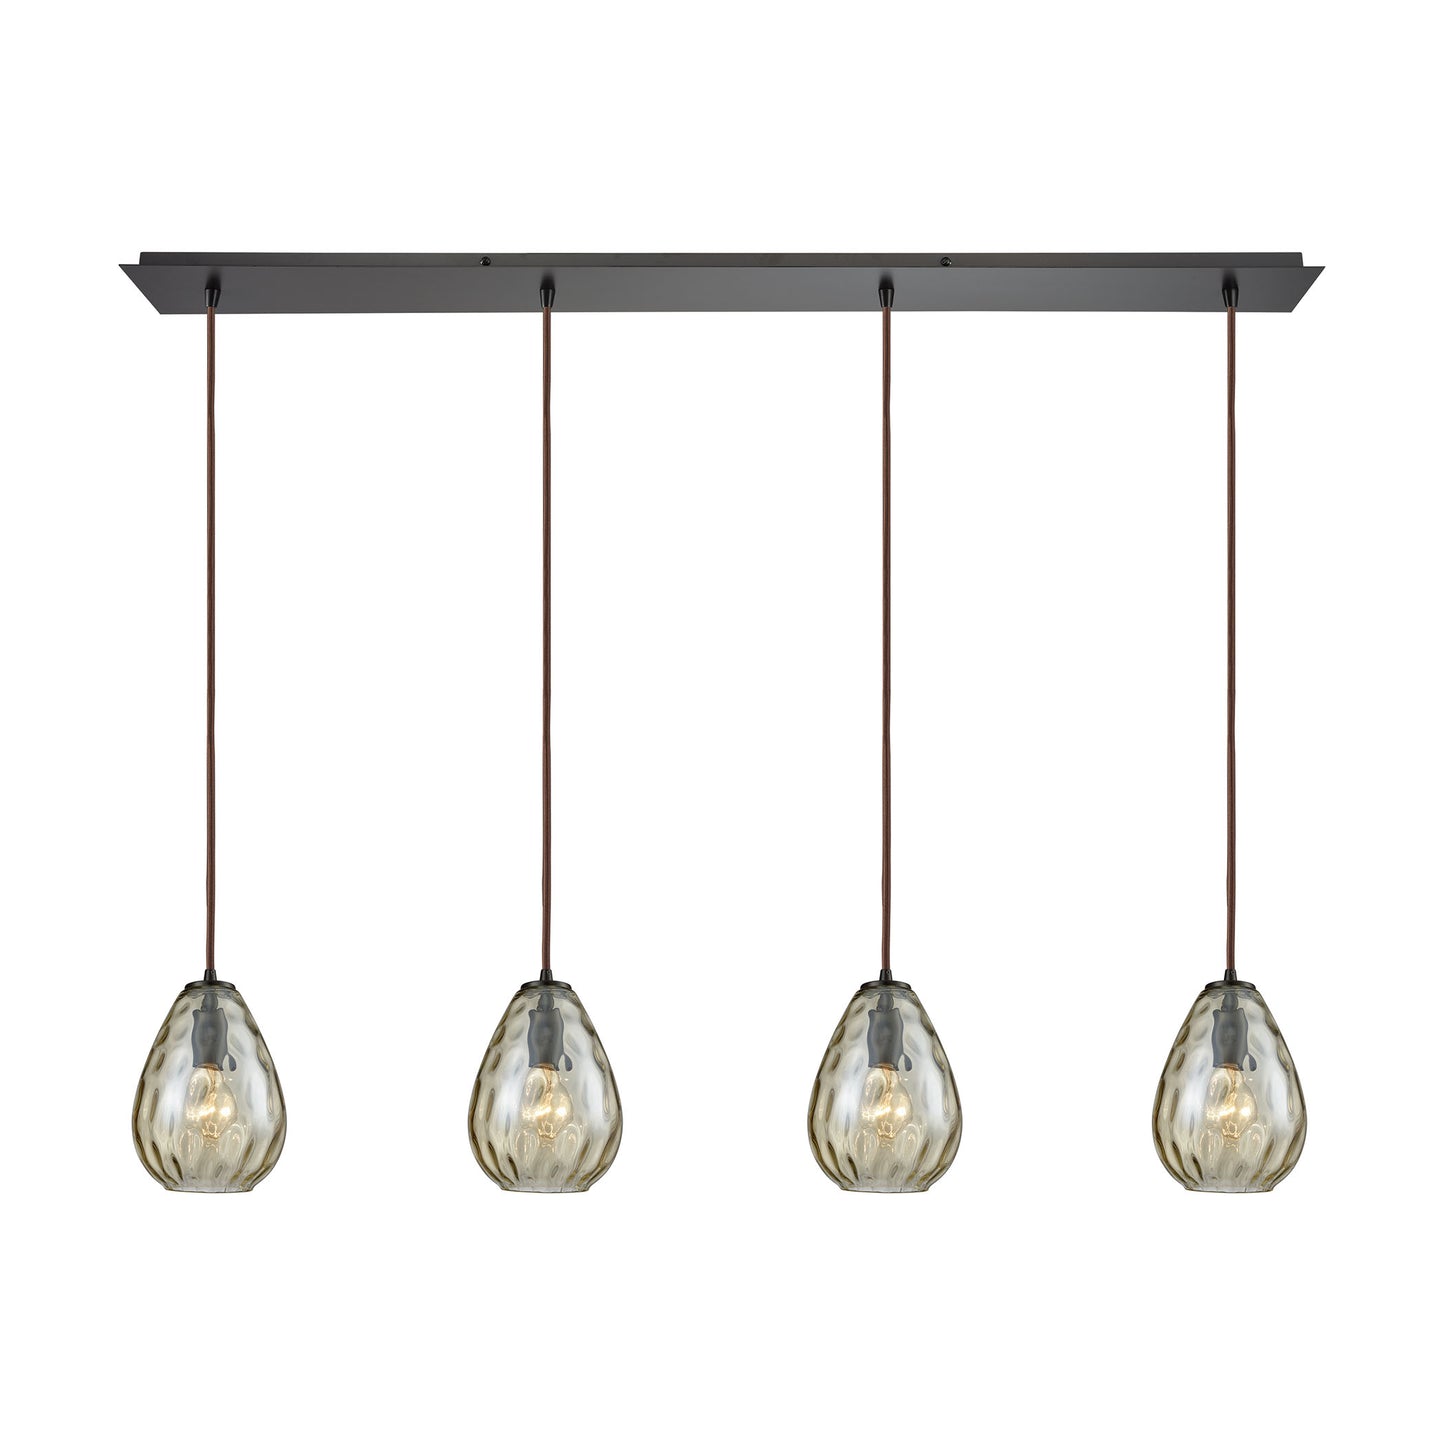 ELK Lighting 10780/4LP - Lagoon 46" Wide 4-Light Linear Pendant Fixture in Oil Rubbed Bronze with Ch